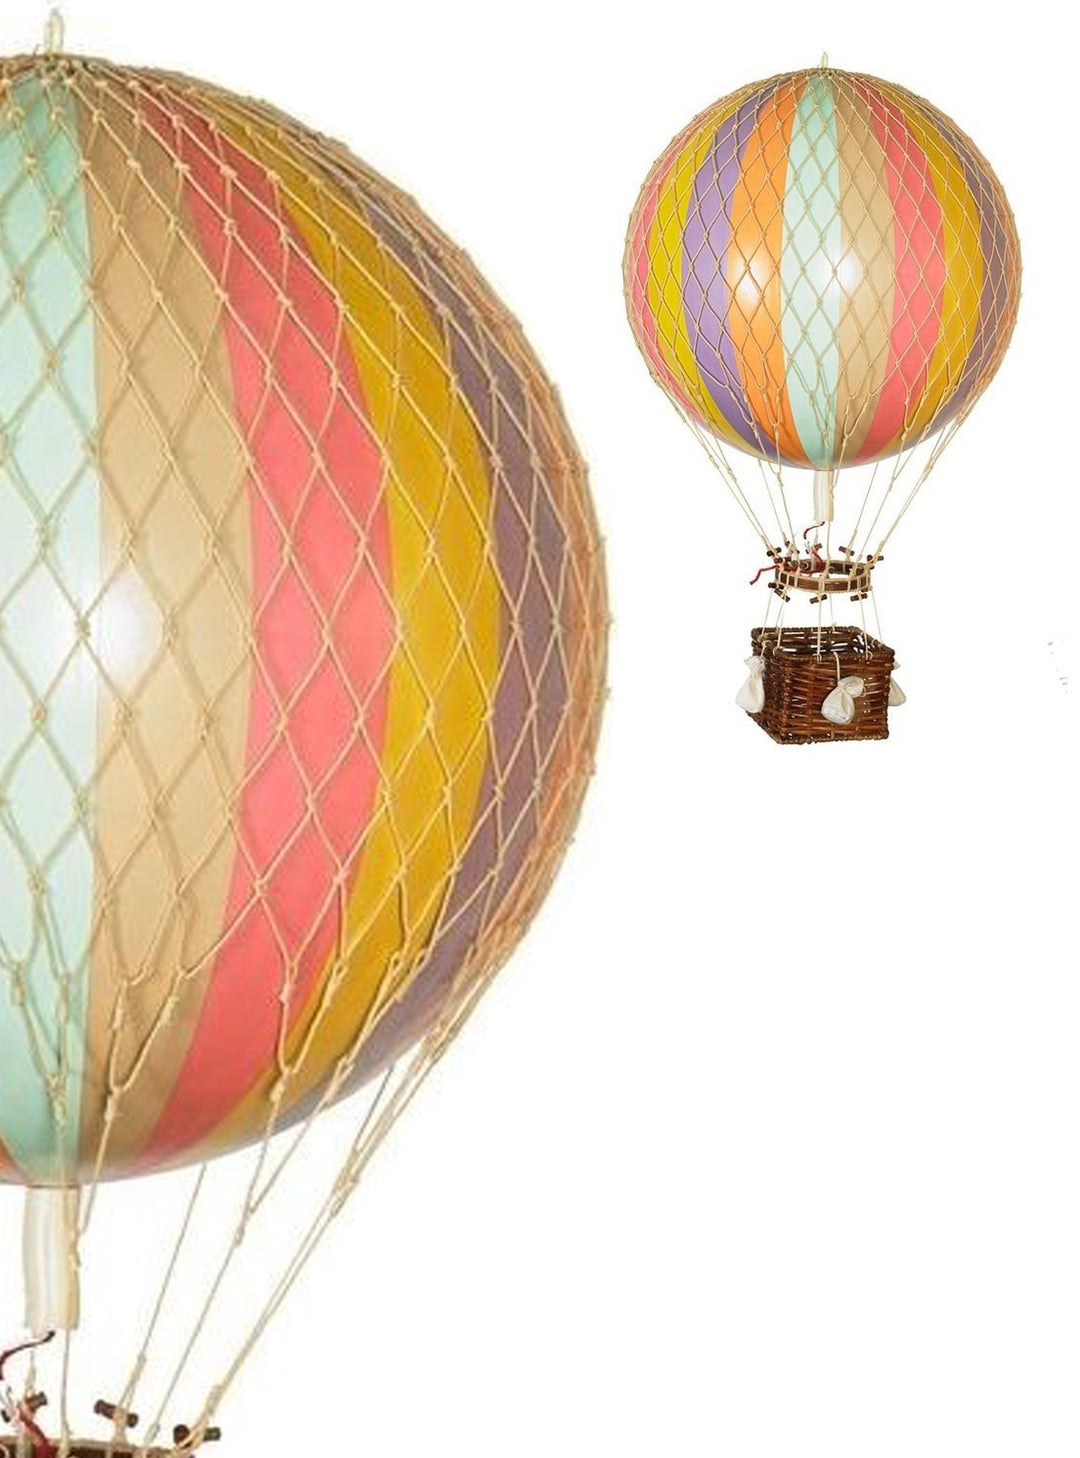 Authentic model  Jules Verne's inspired vintage replica hot air balloon